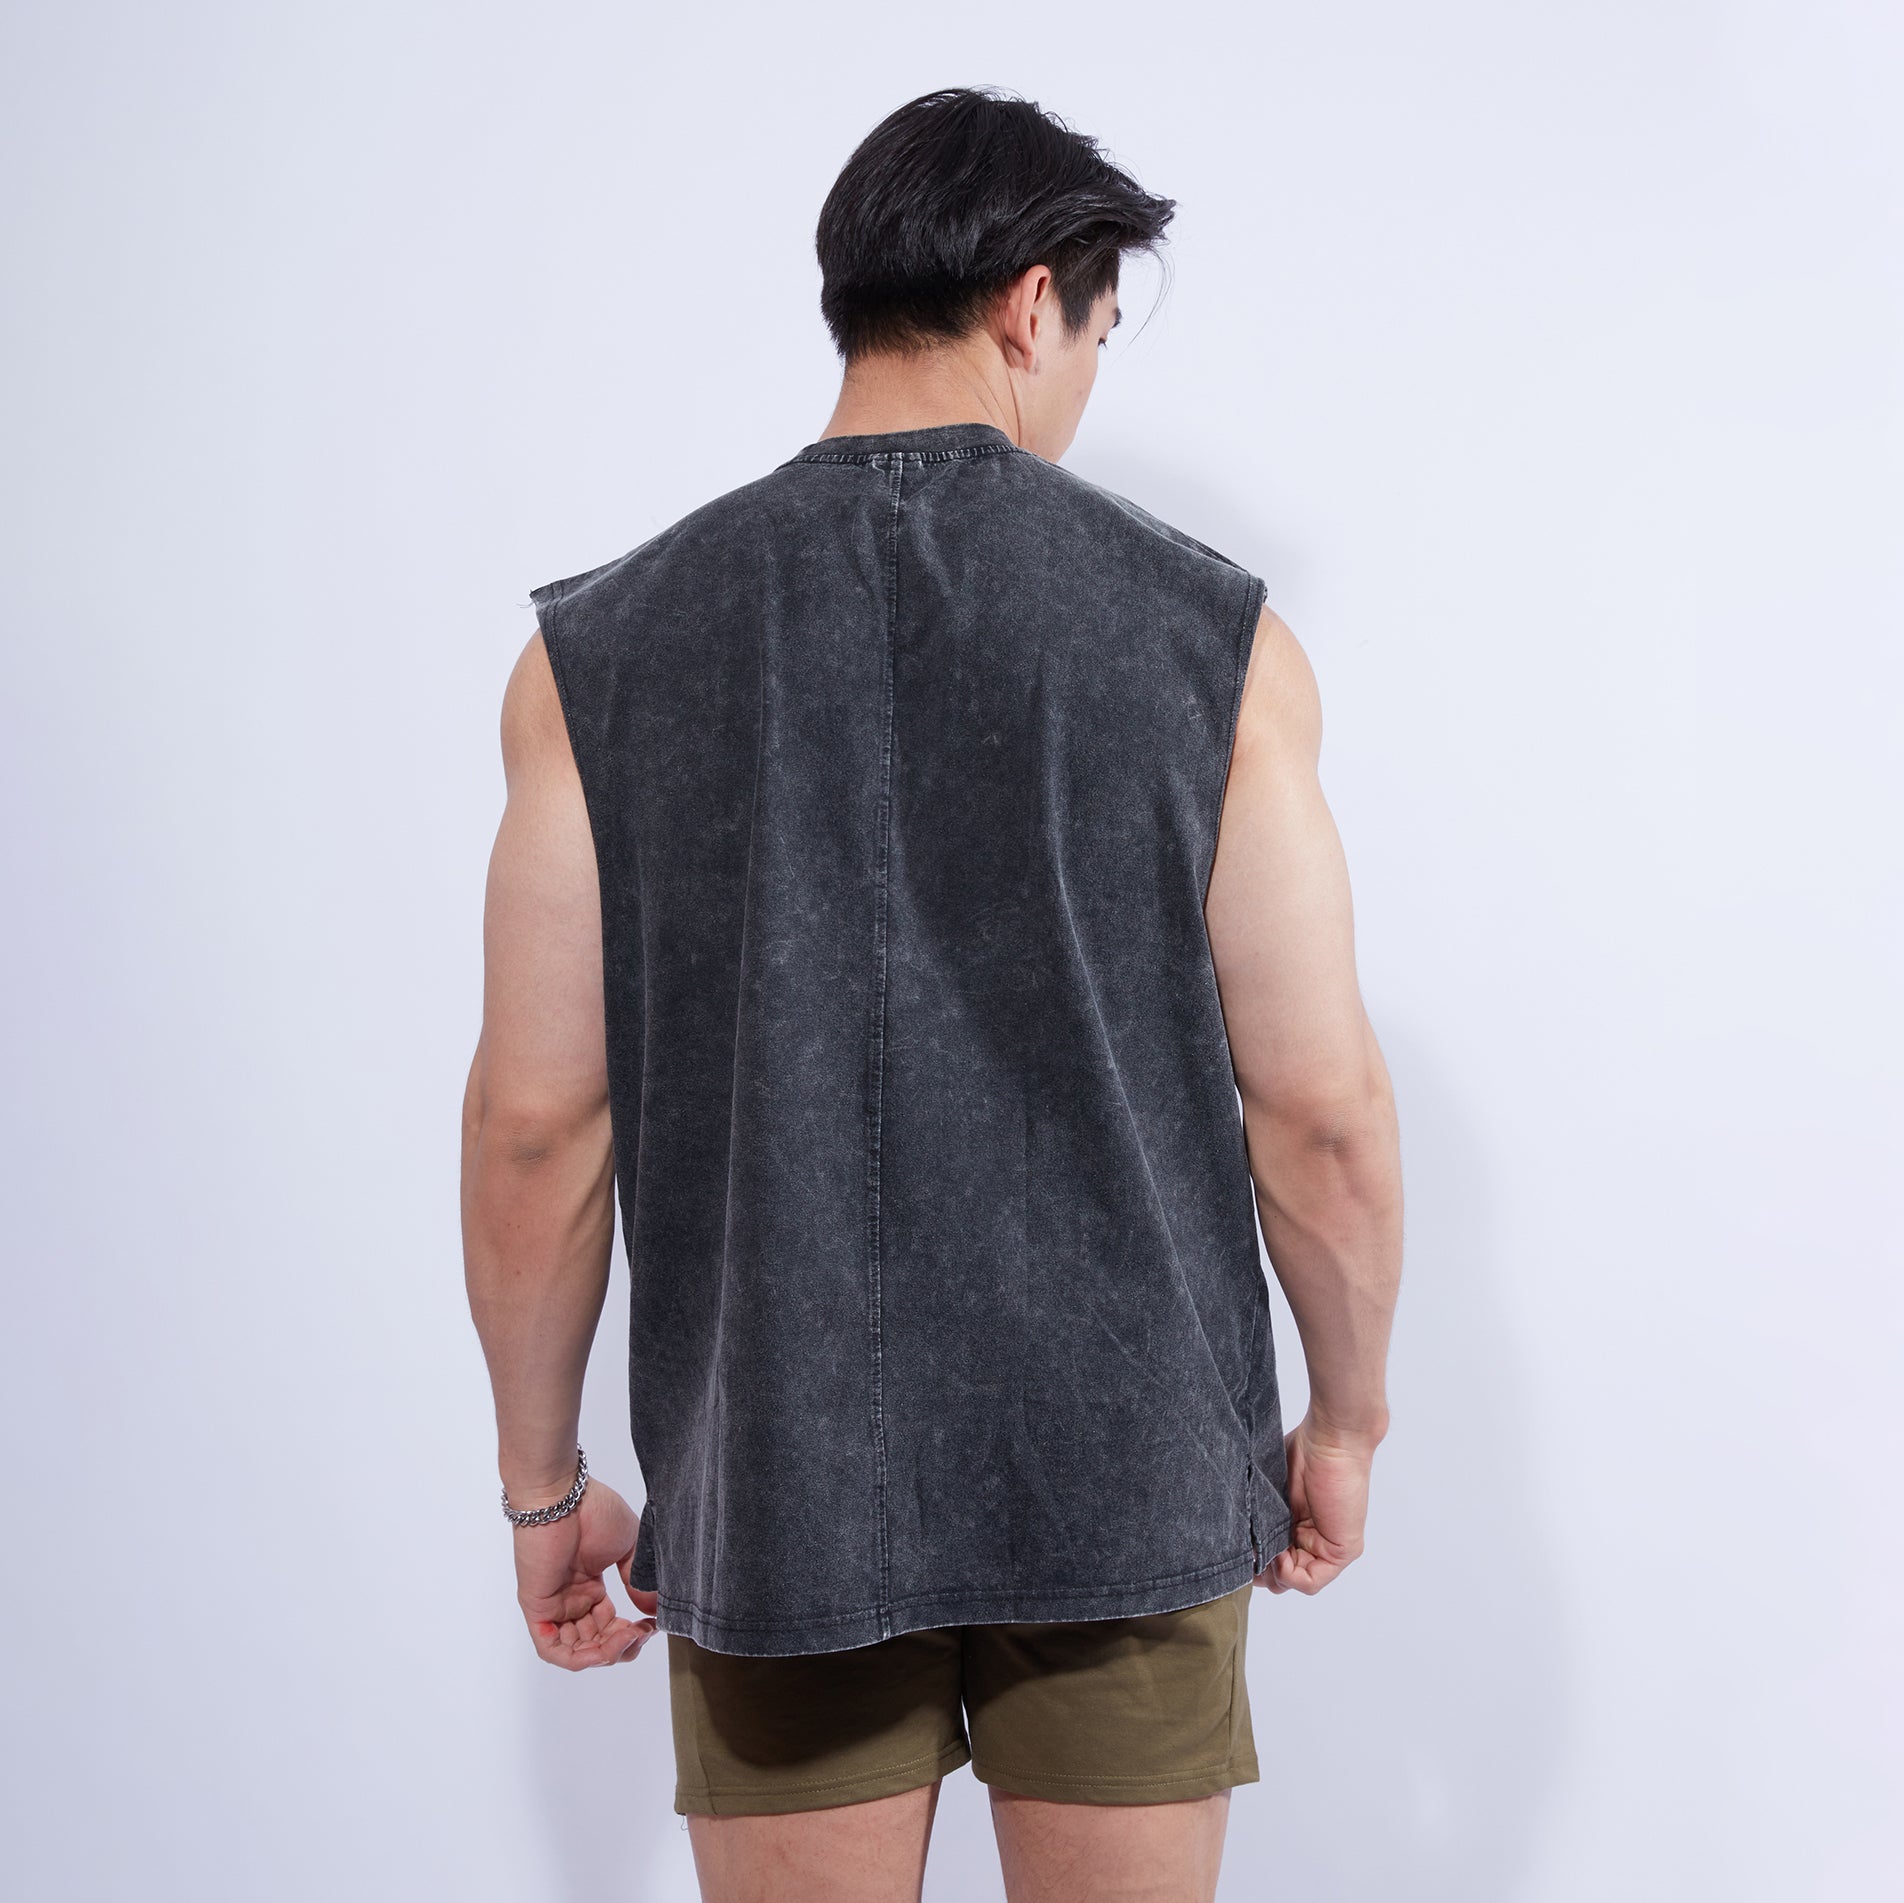 Musculo Stone washed oversized gym tanks